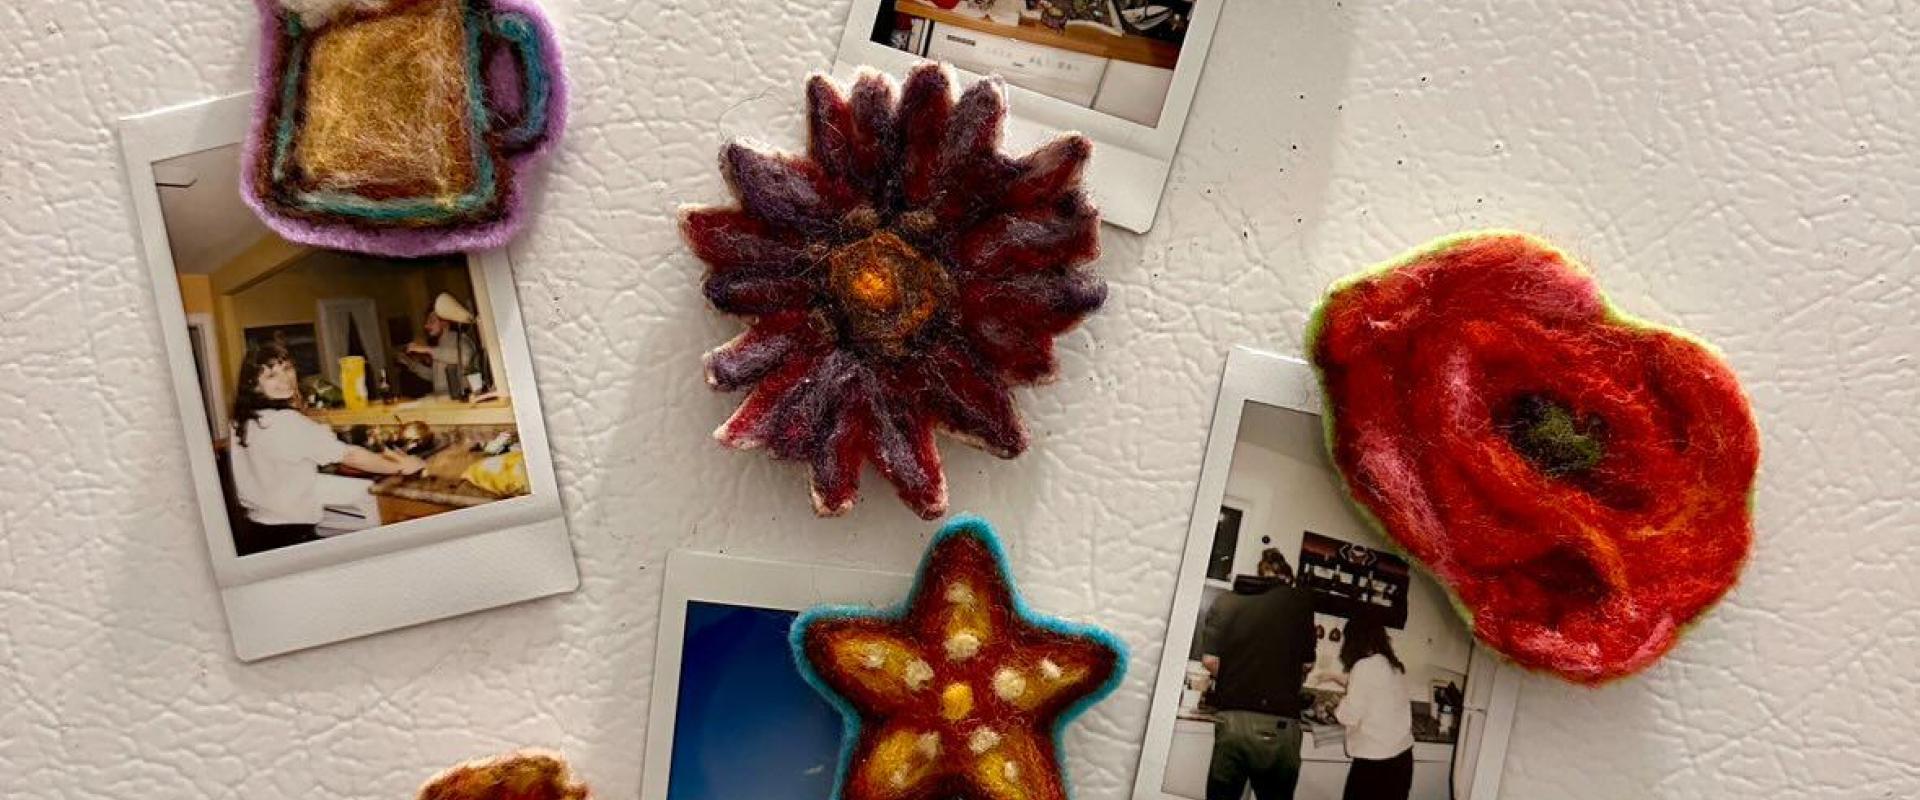 small hand felted magnets in the shapes of flowers and other objects on fridge door